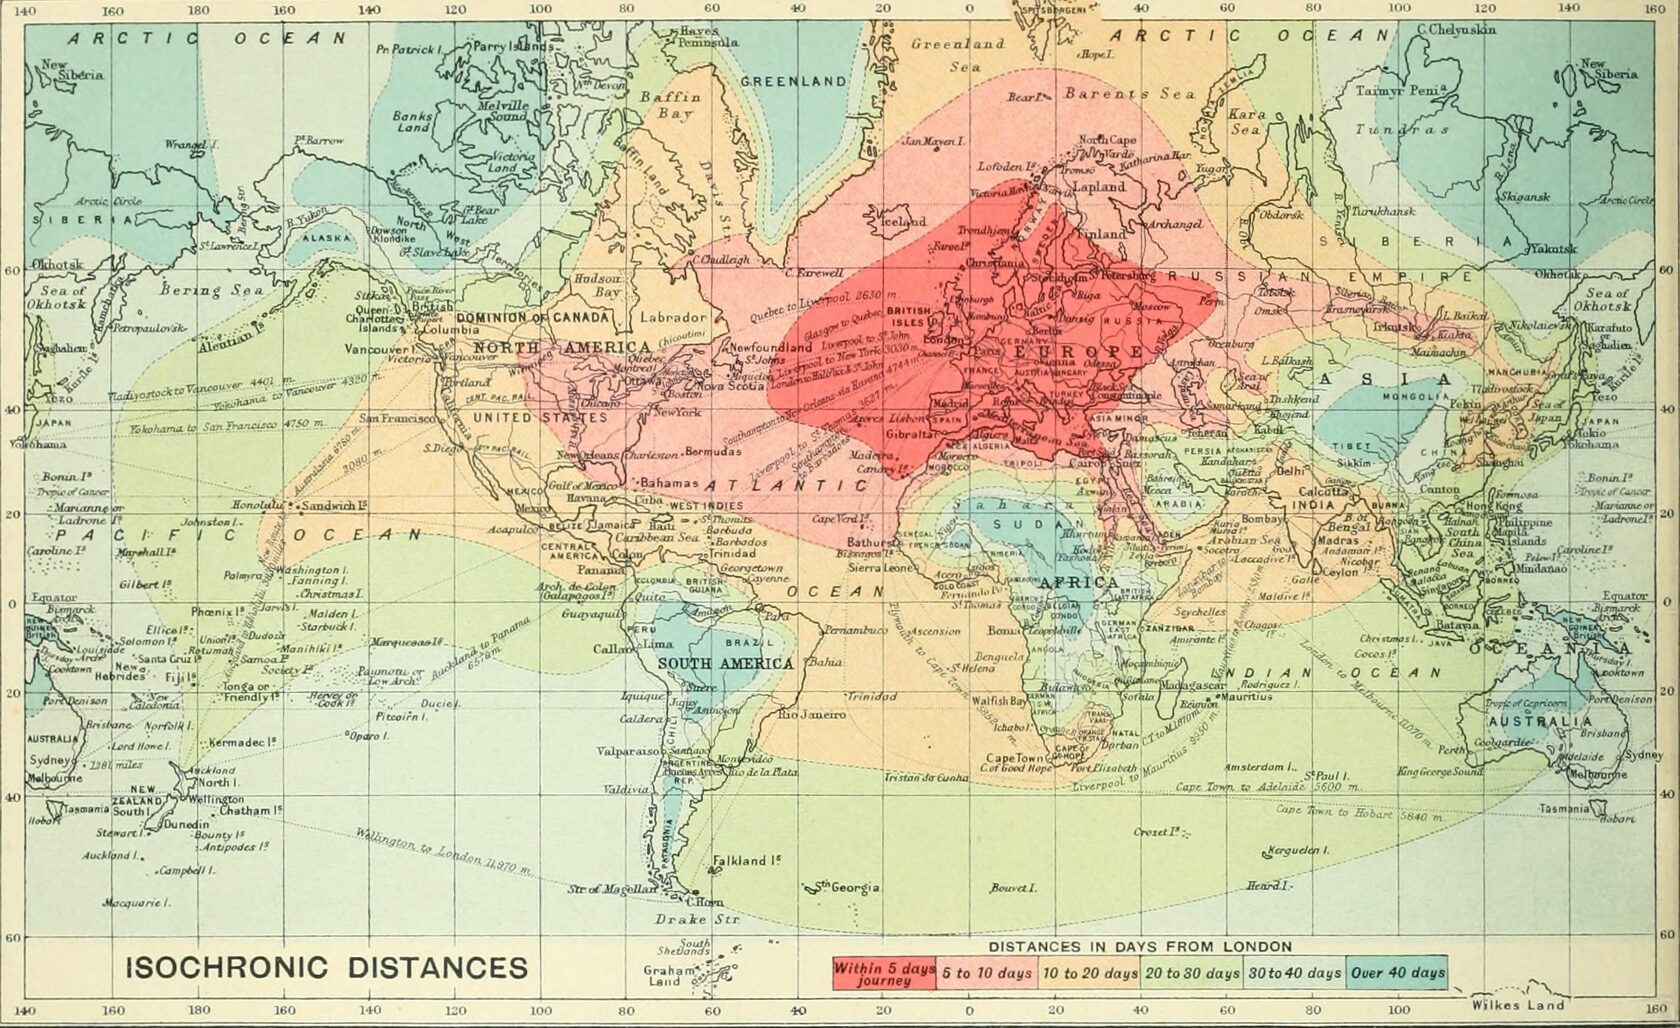 J.G. Bartholomew's second isochrone map of the world, from 1914.